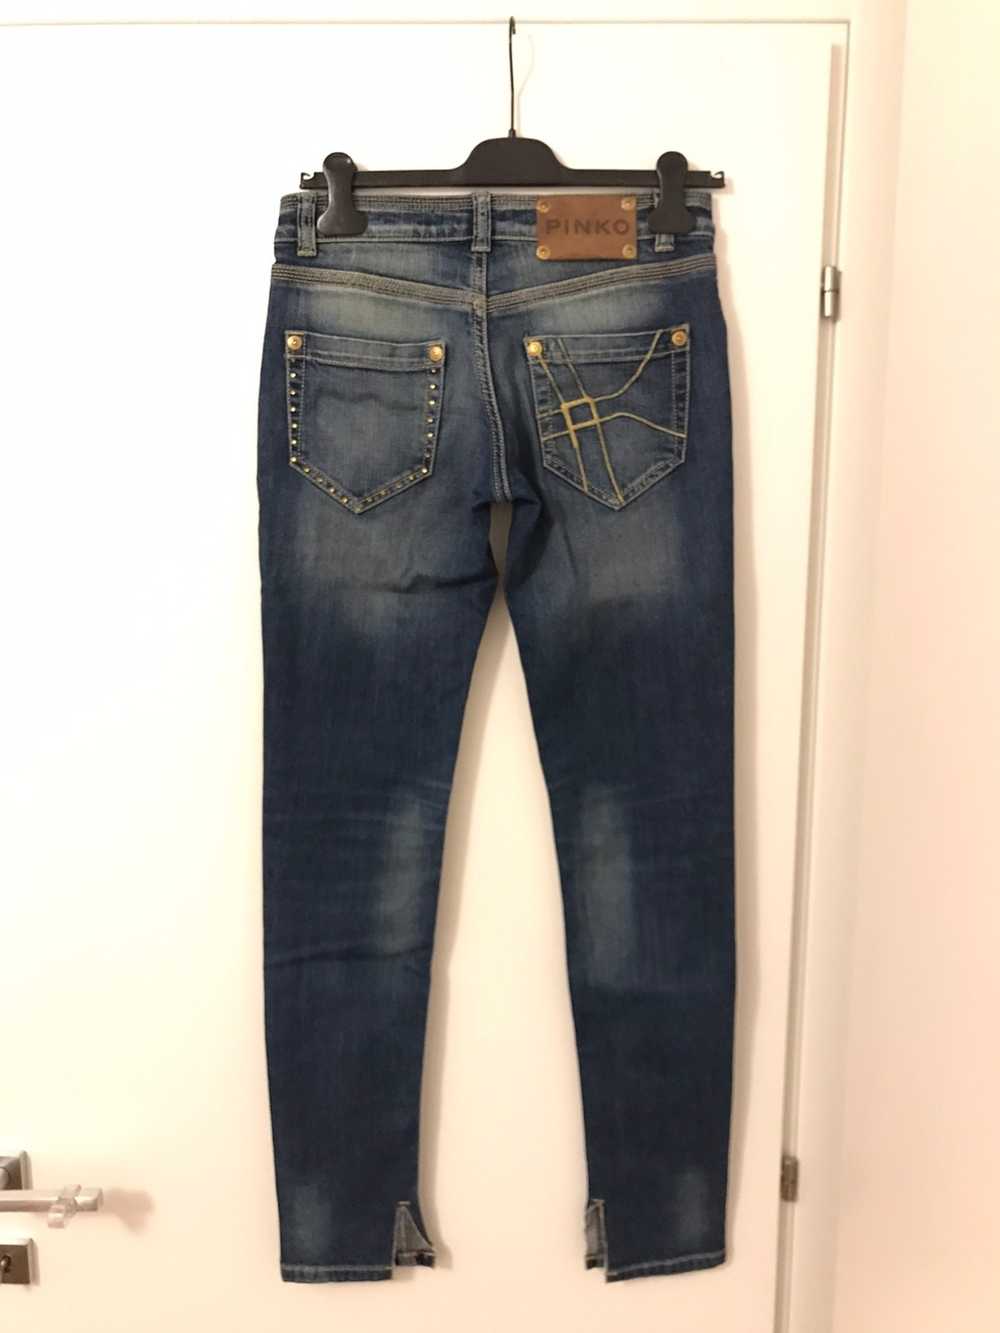 Other Pinko wmns denim jeans - image 2